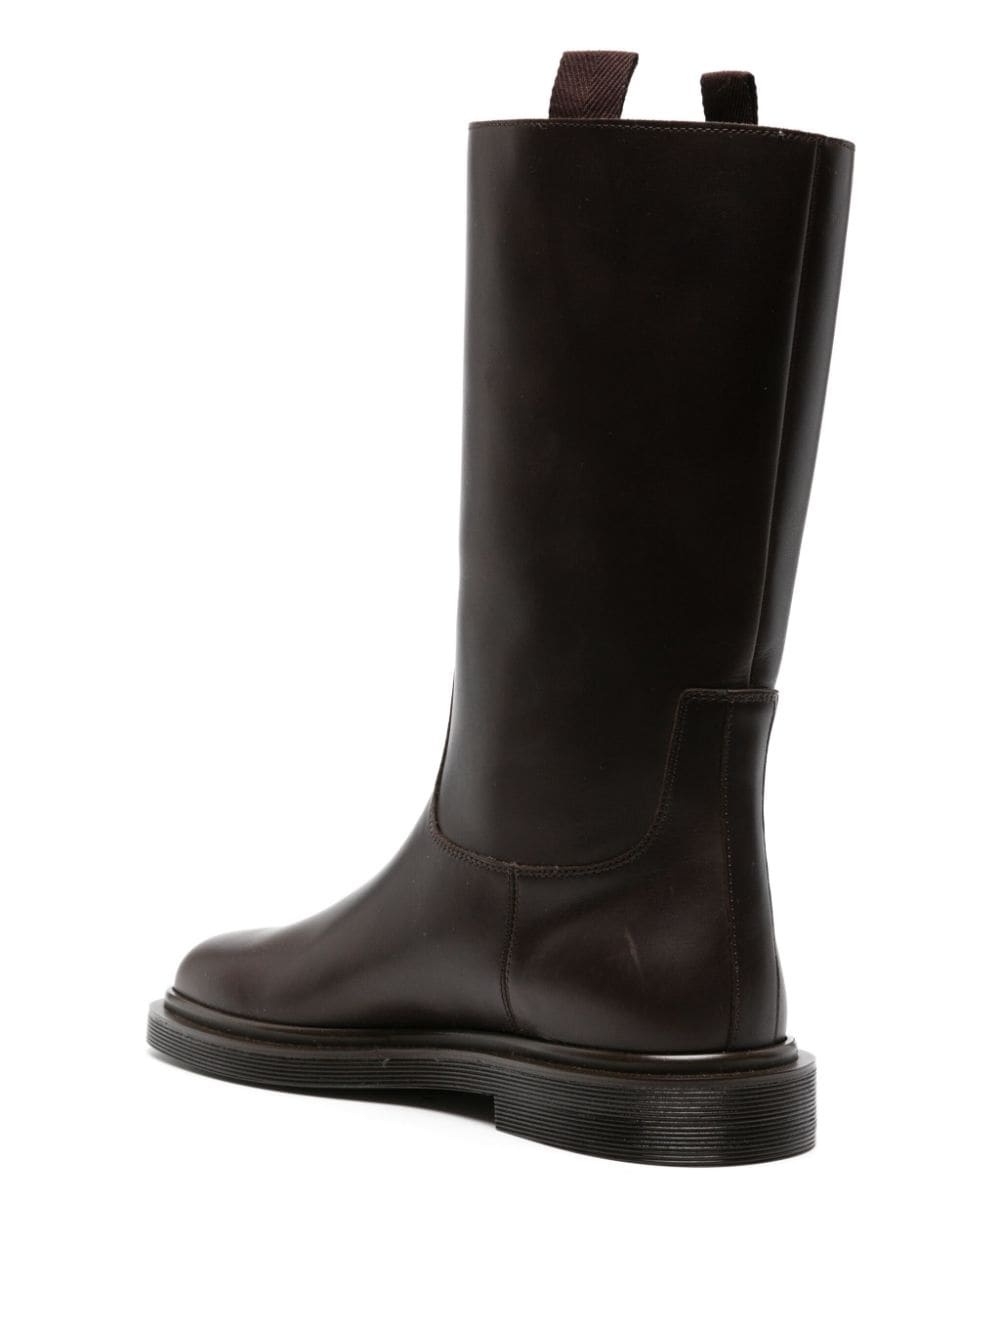 Ranger Tubo leather boots - 3